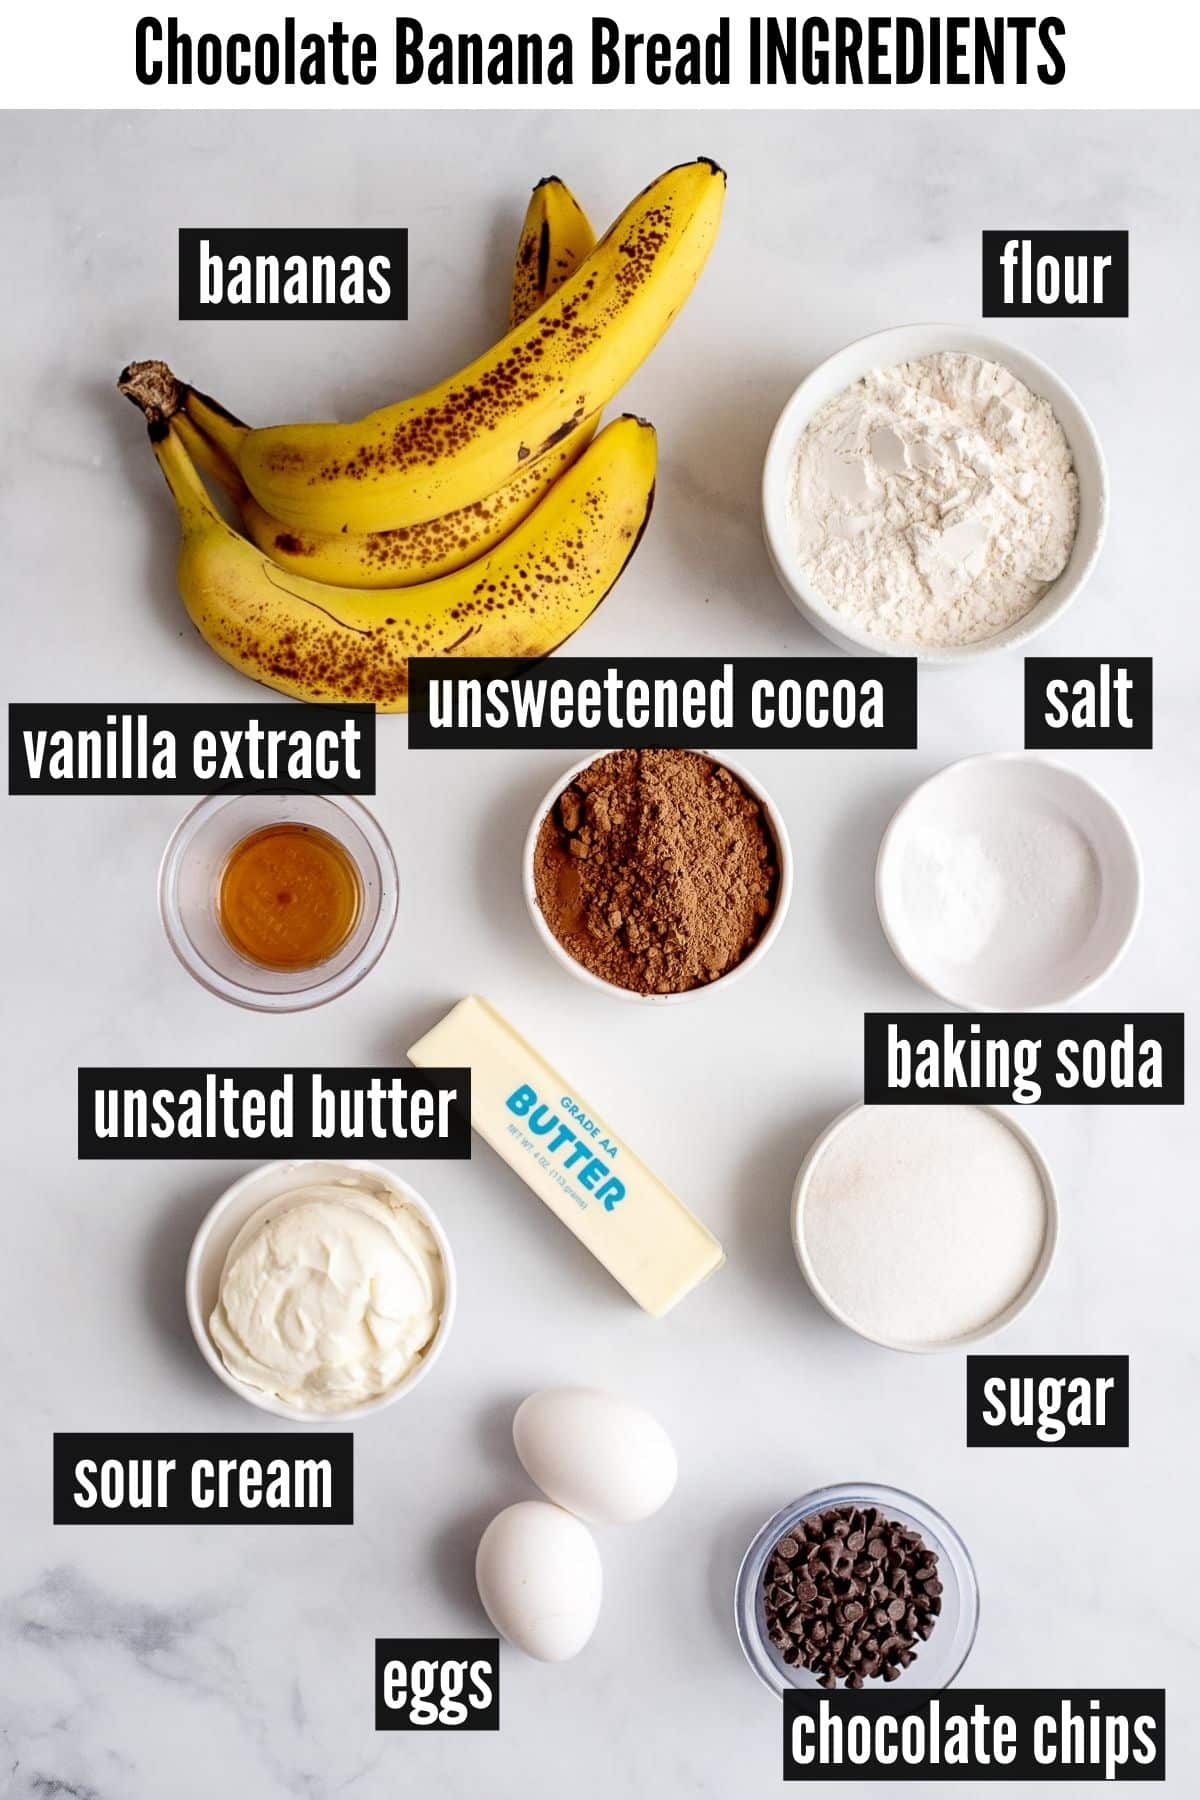 chocolate banana bread labelled ingredients